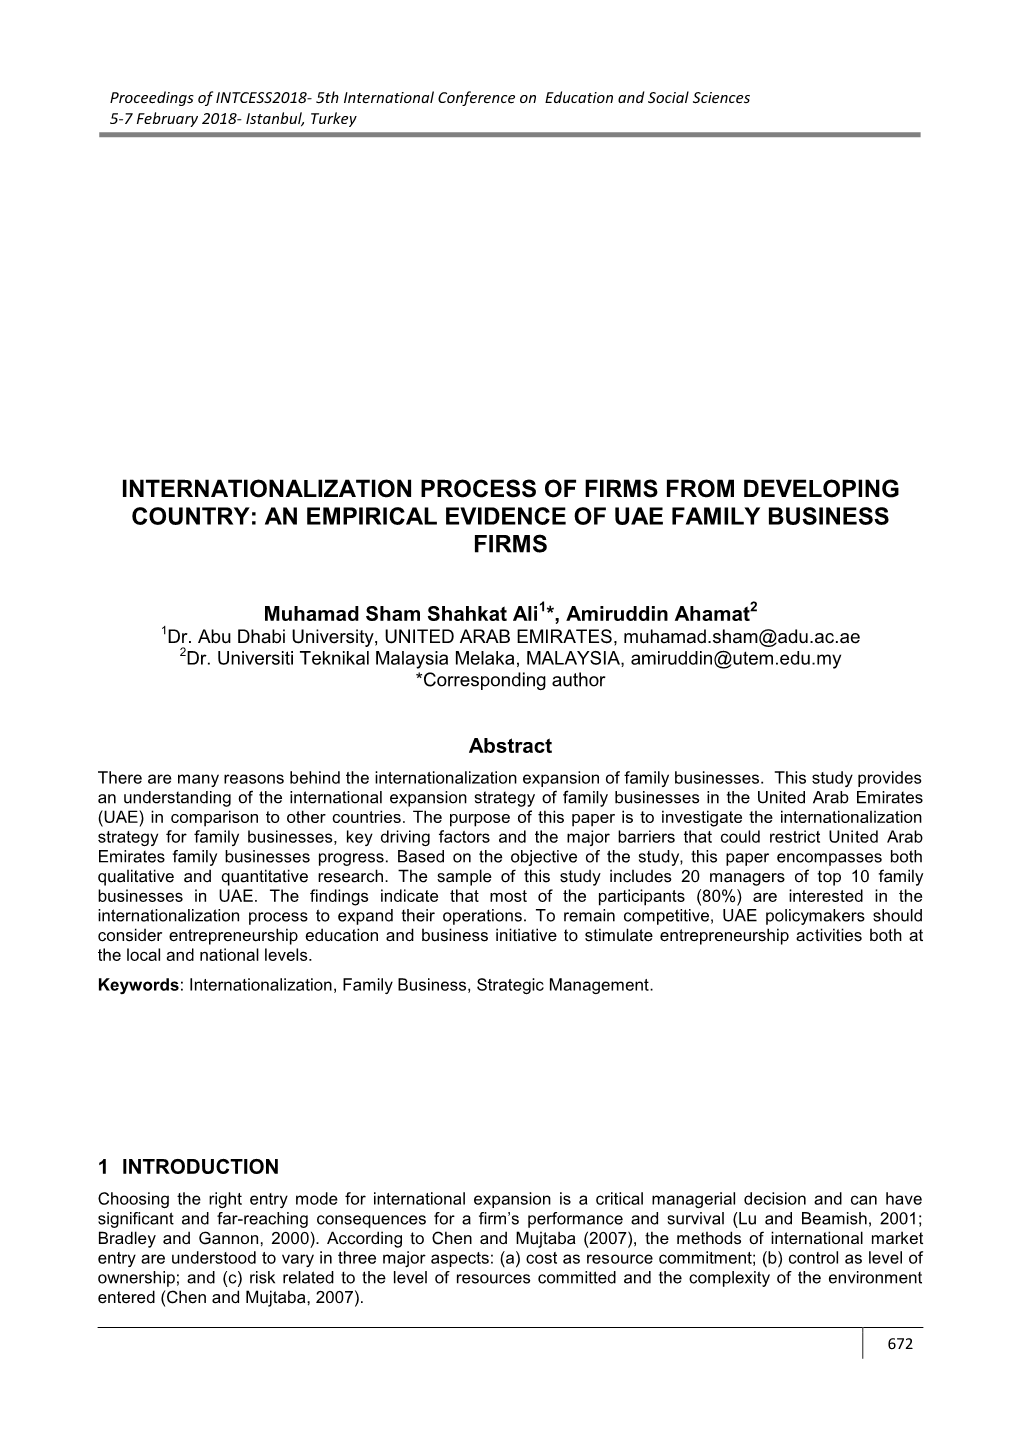 Internationalization Process of Firms from Developing Country: an Empirical Evidence of Uae Family Business Firms